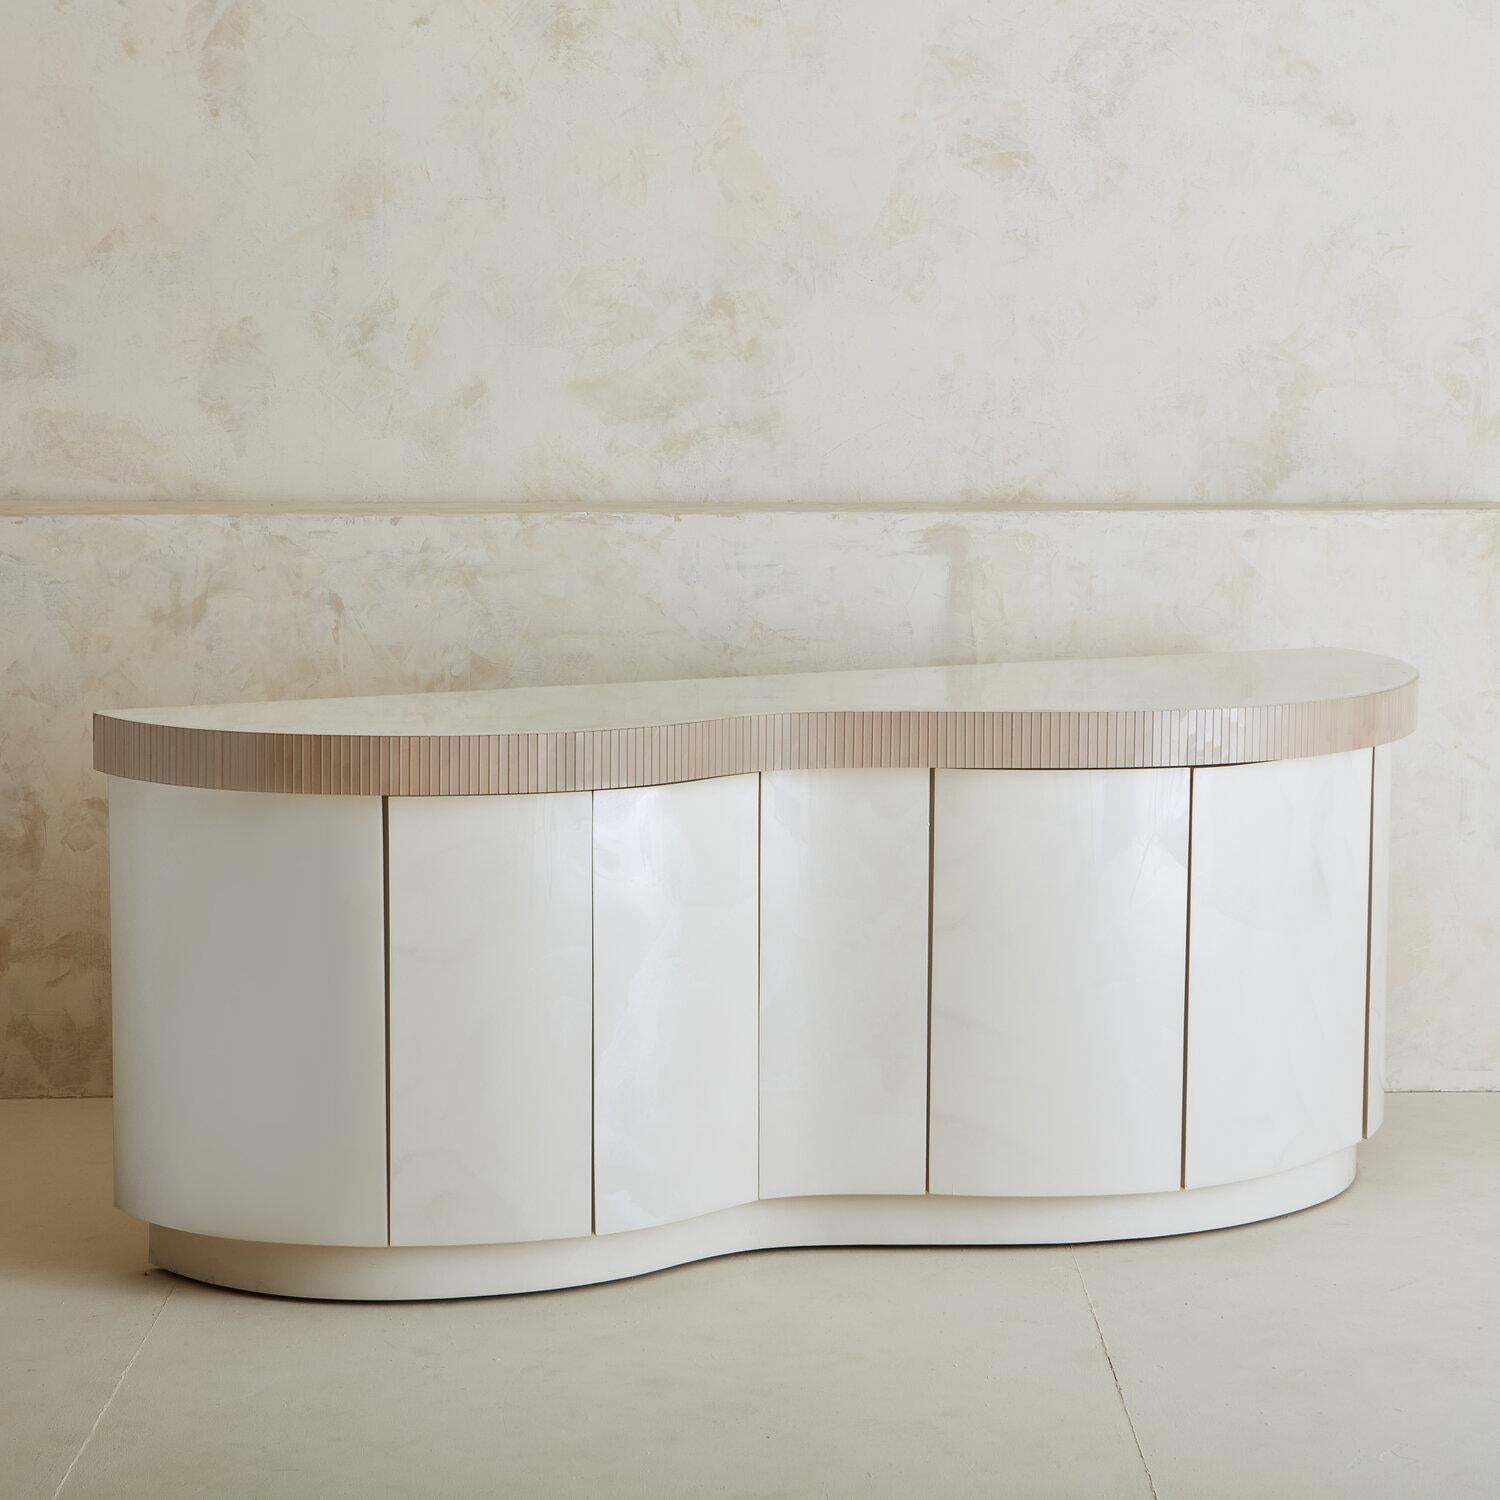 A glossy ivory laminate credenza featuring a dramatic curved front, a recessed plinth base and a taupe fluted glass tile trim. This credenza has four vertical doors that open outwards with push latch hardware, revealing four adjustable shelves and